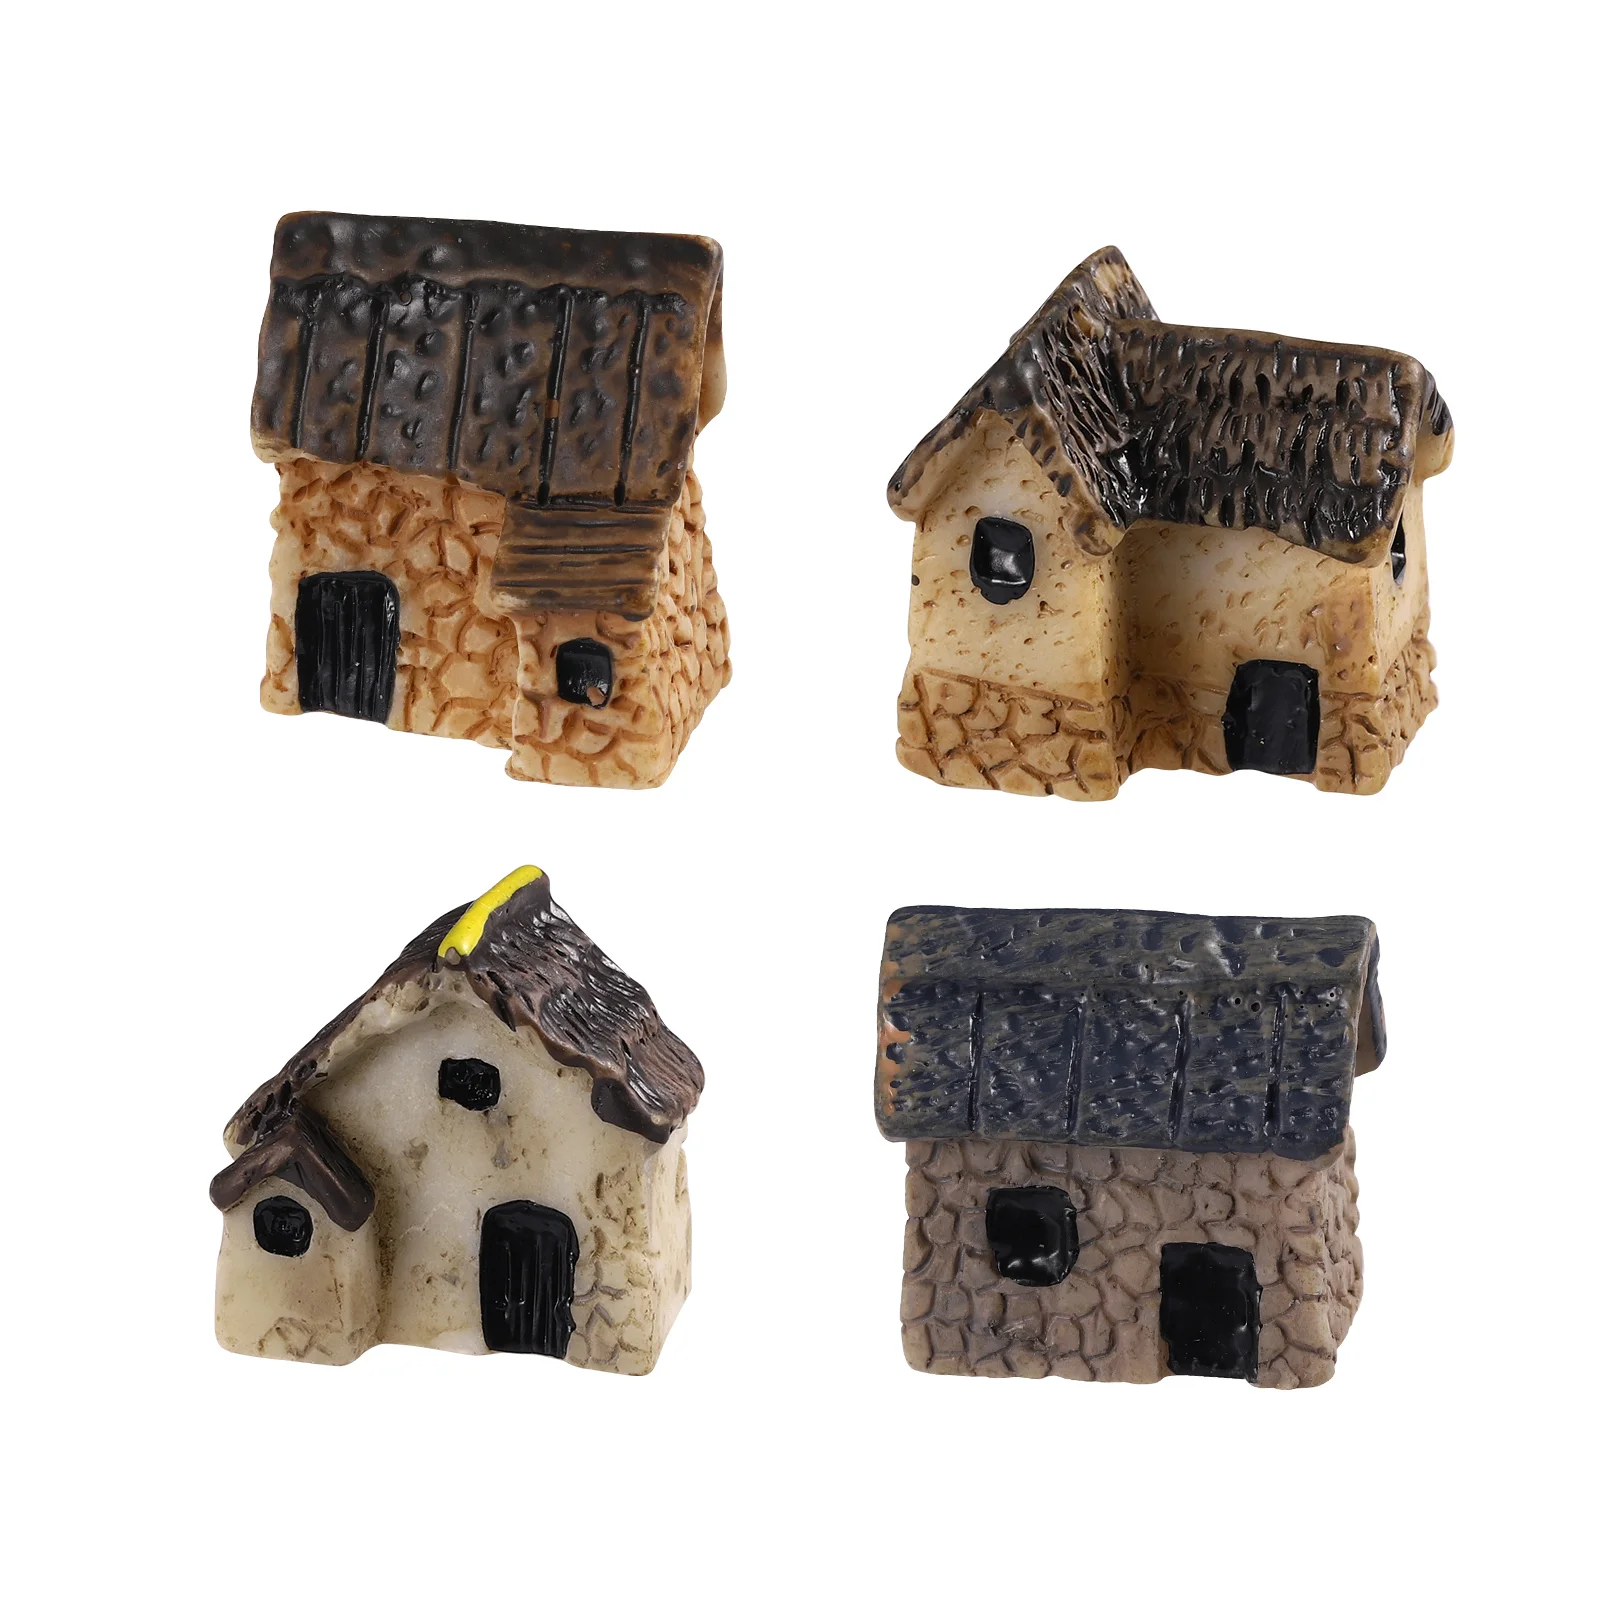 

Garneck 4PCS Miniature Gardening Landscape Micro Village Stone Houses Thatched Huts DIY Bonsai Home Furnishings for Fairy